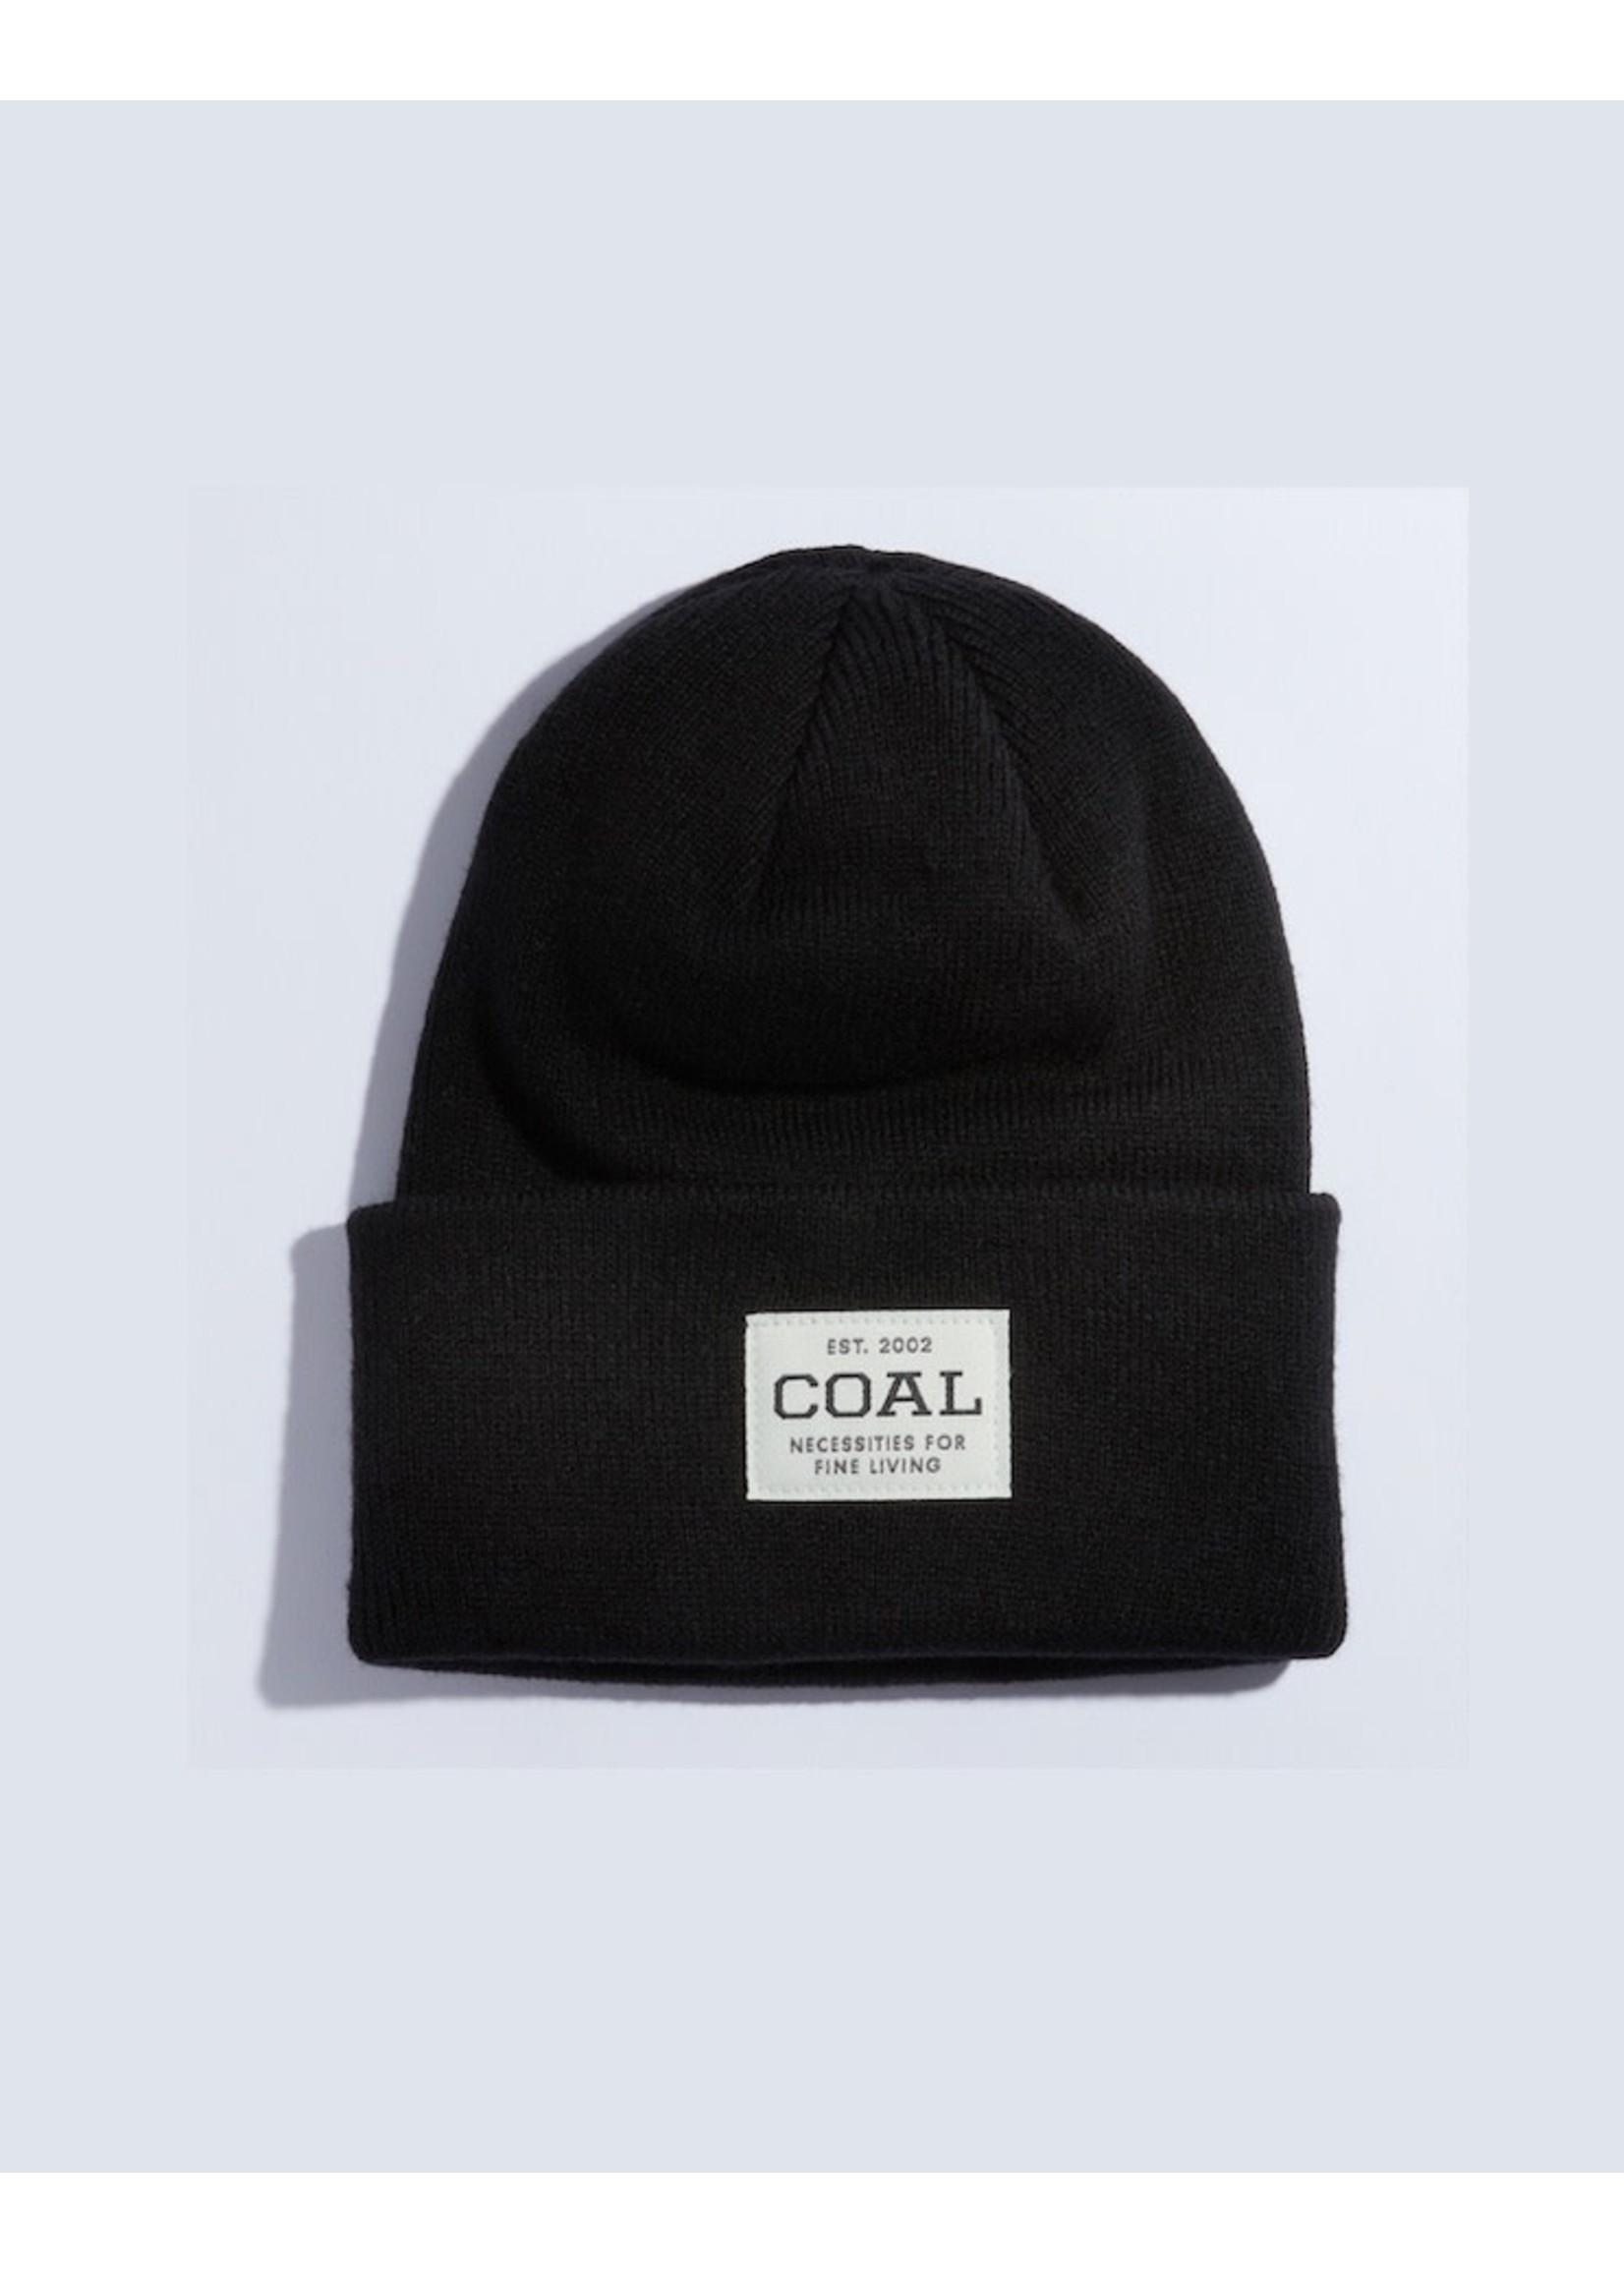 Coal Coal, The Adult Uniform Recycled Knit Cuff Beanie